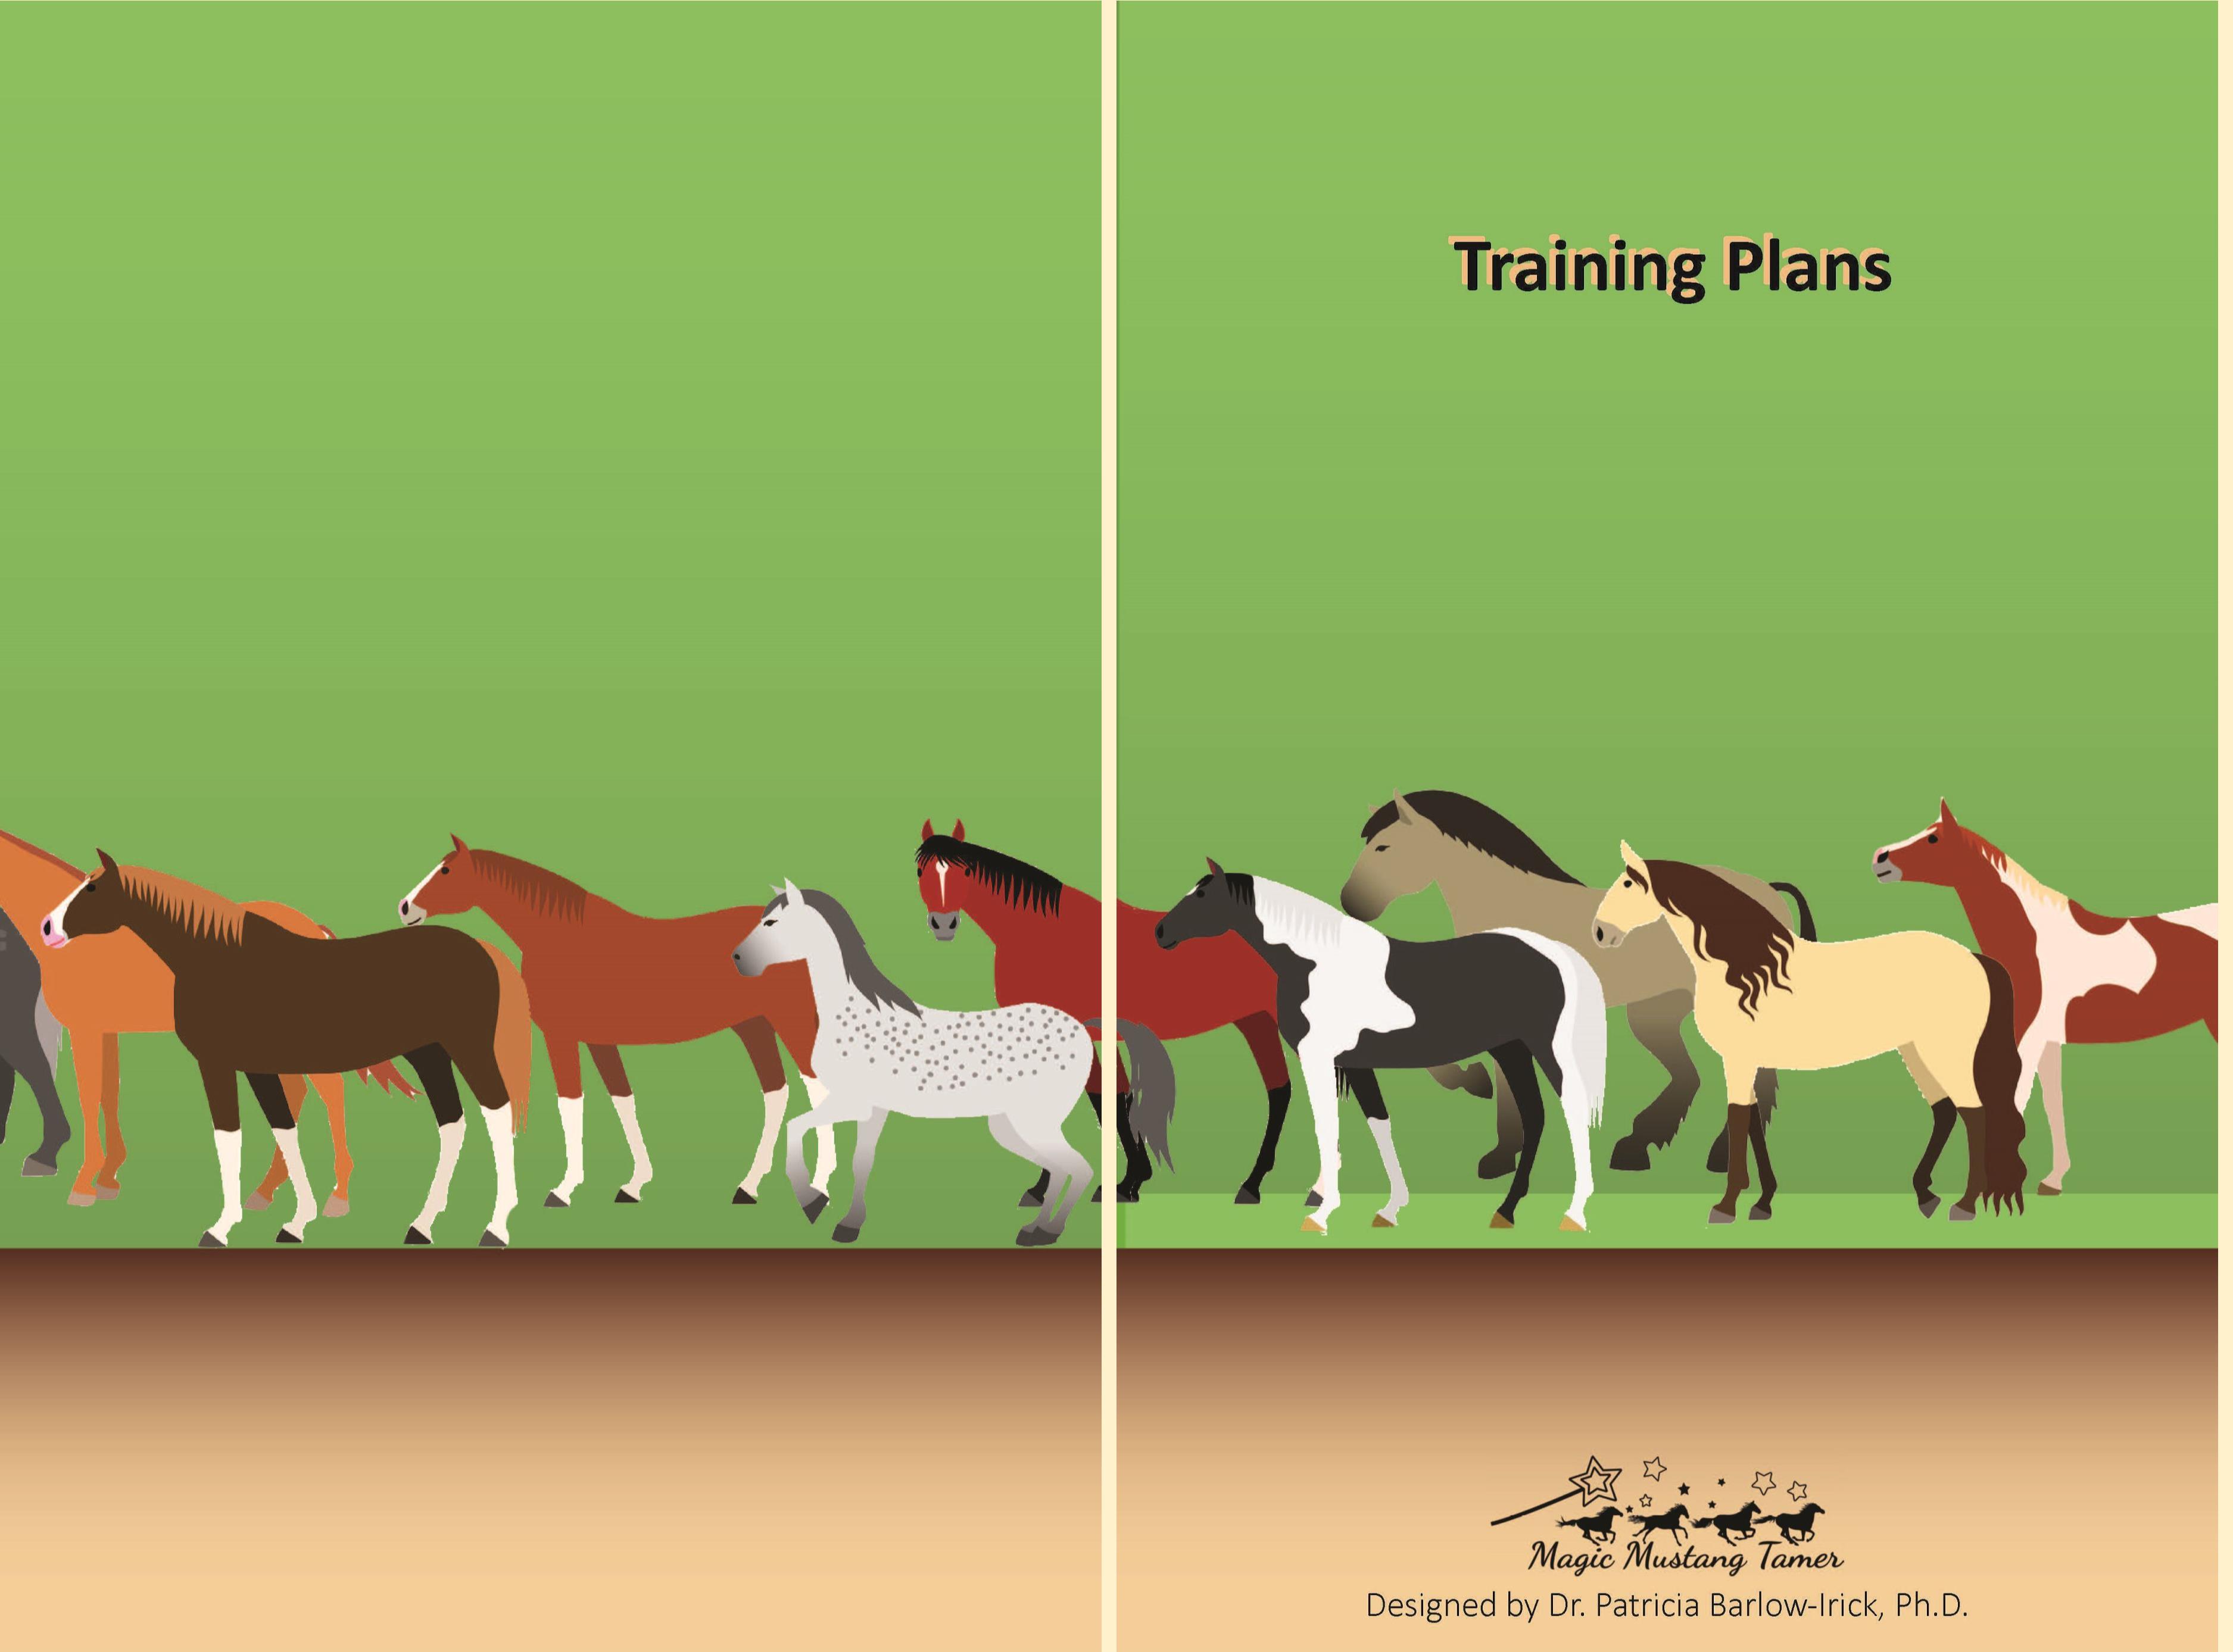 Training Plans cover image